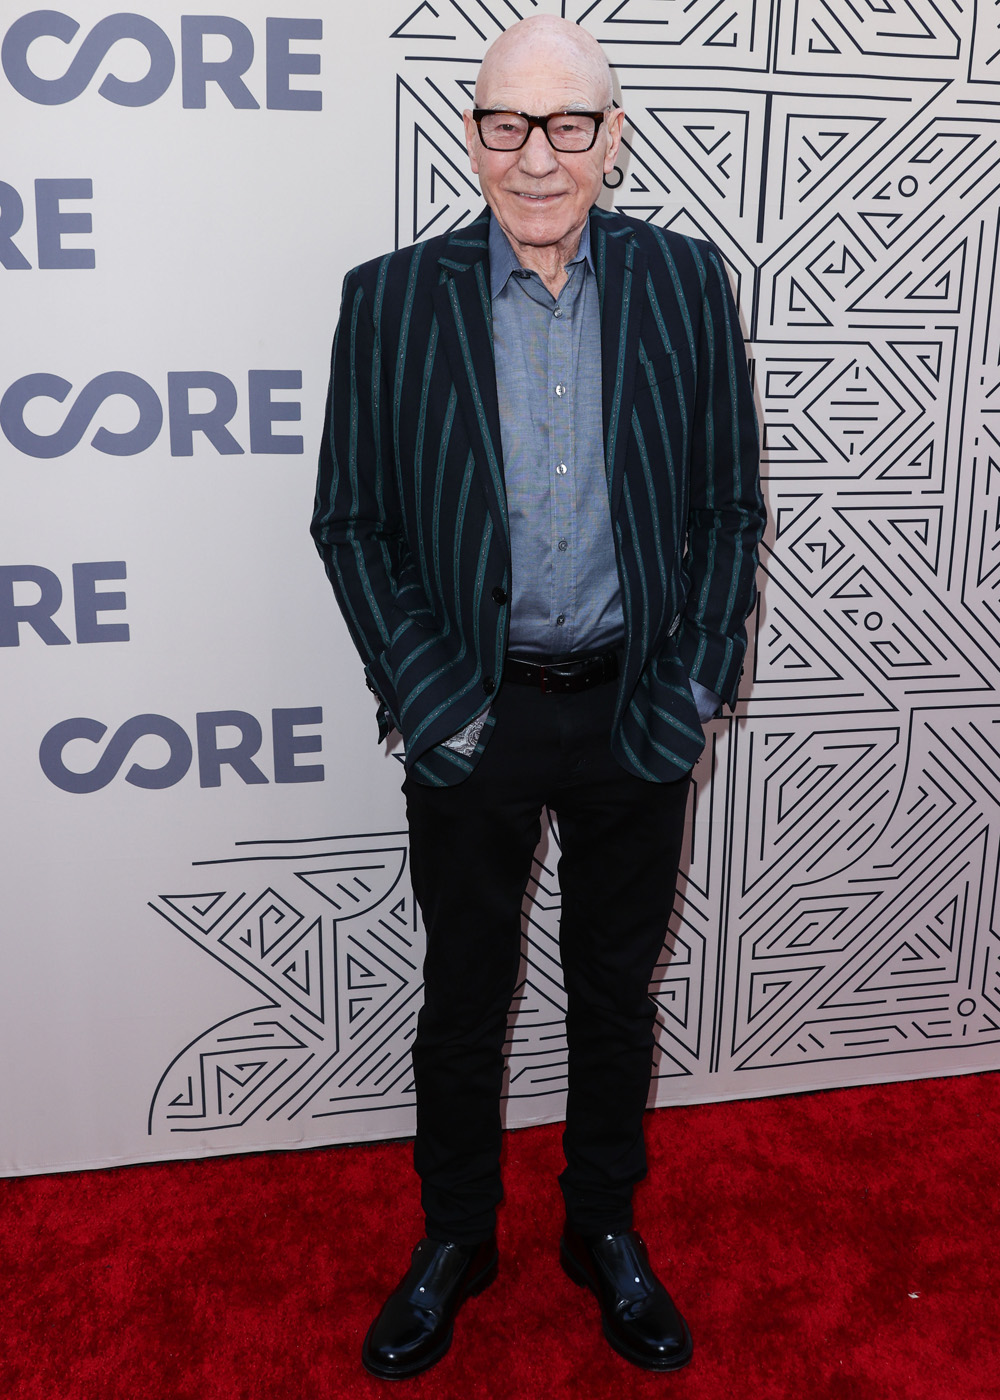 <p>Patrick Stewart arrives at the 2022 CORE Gala hosted by Sean Penn and Ann Lee on Jun. 10, 2022. He wore a stylish striped jacket and black pants for the event.</p>